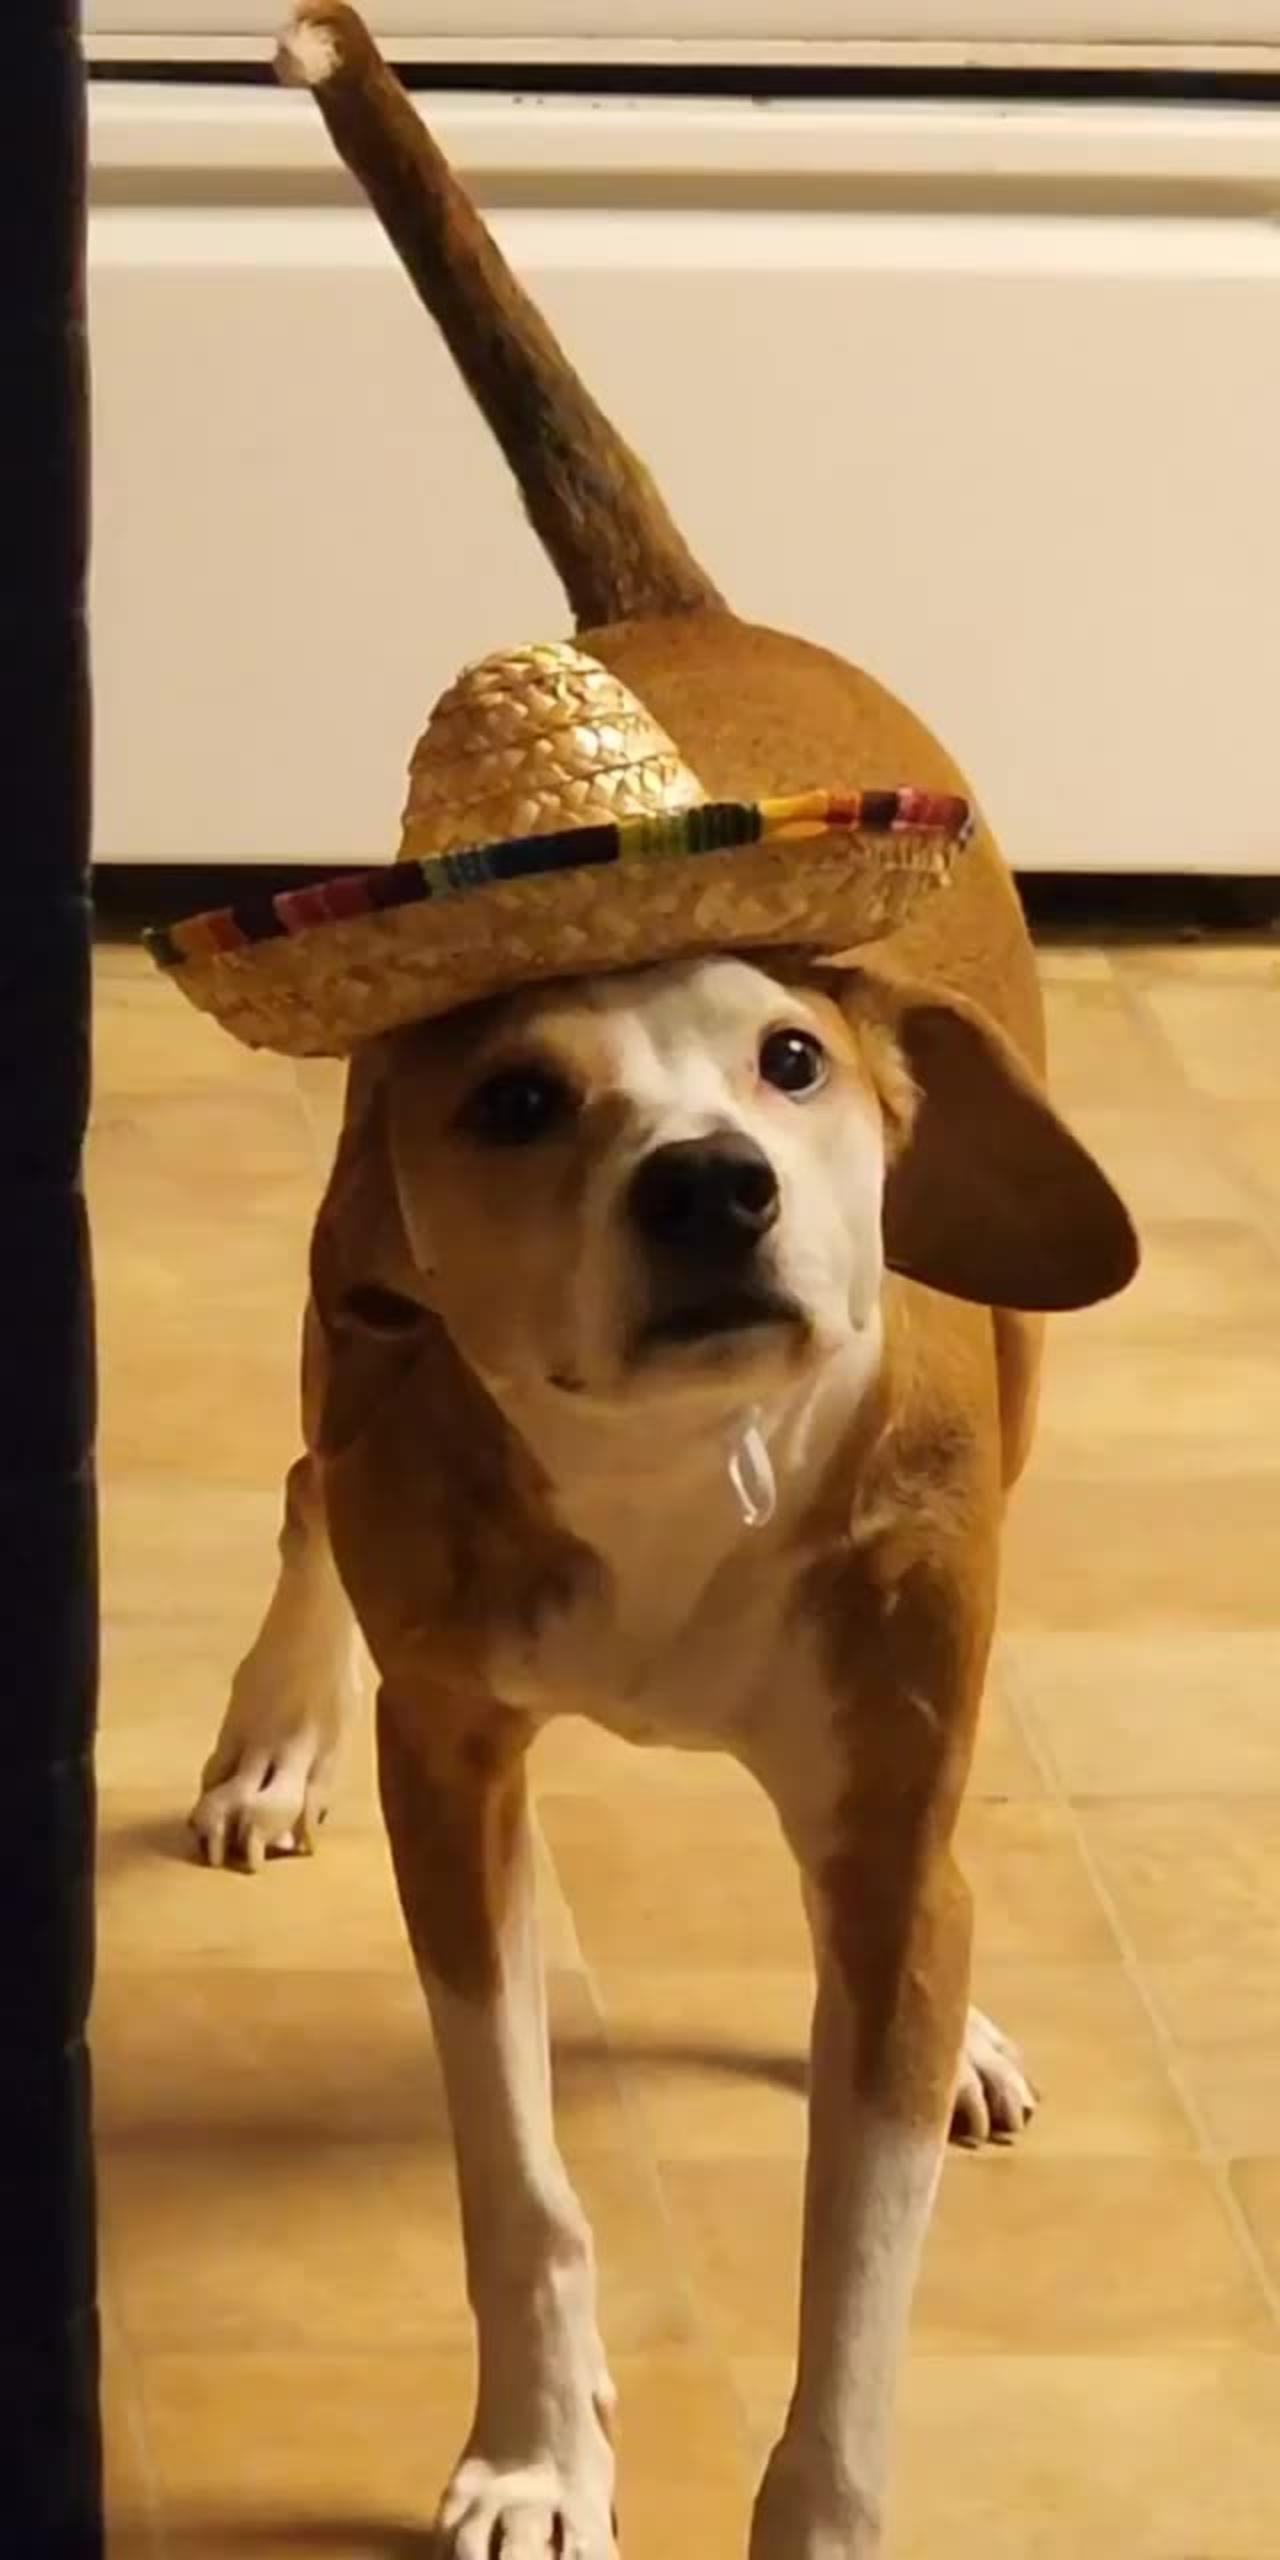 Sombrero Causes Dog to Freeze in Place